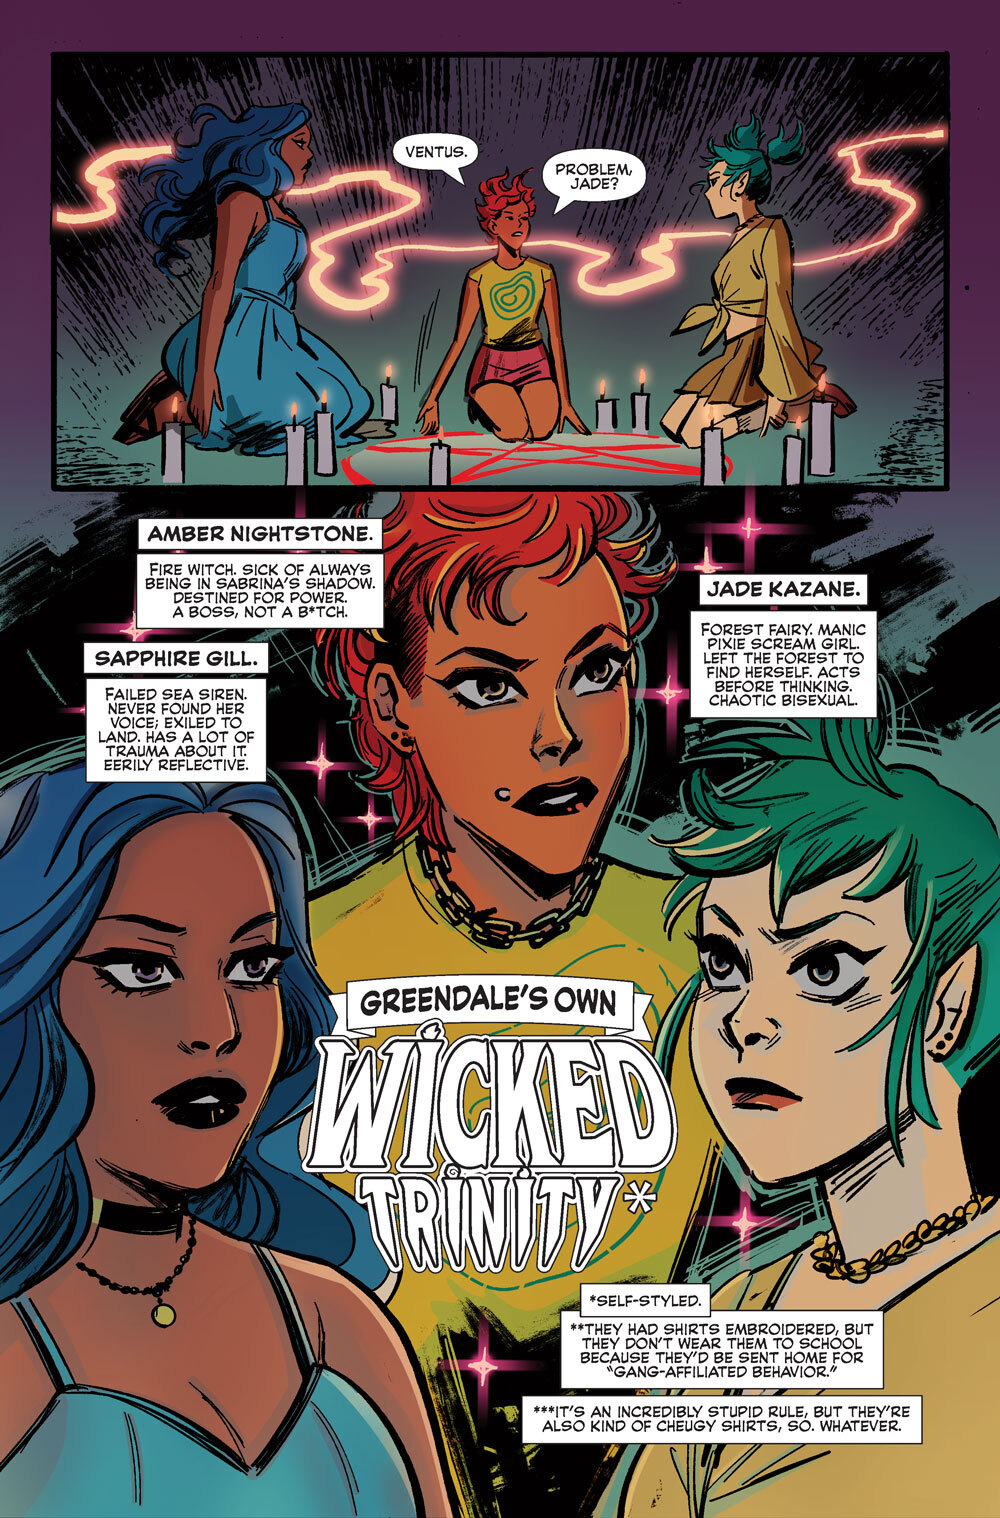 Art from The Wicked Trinity #1